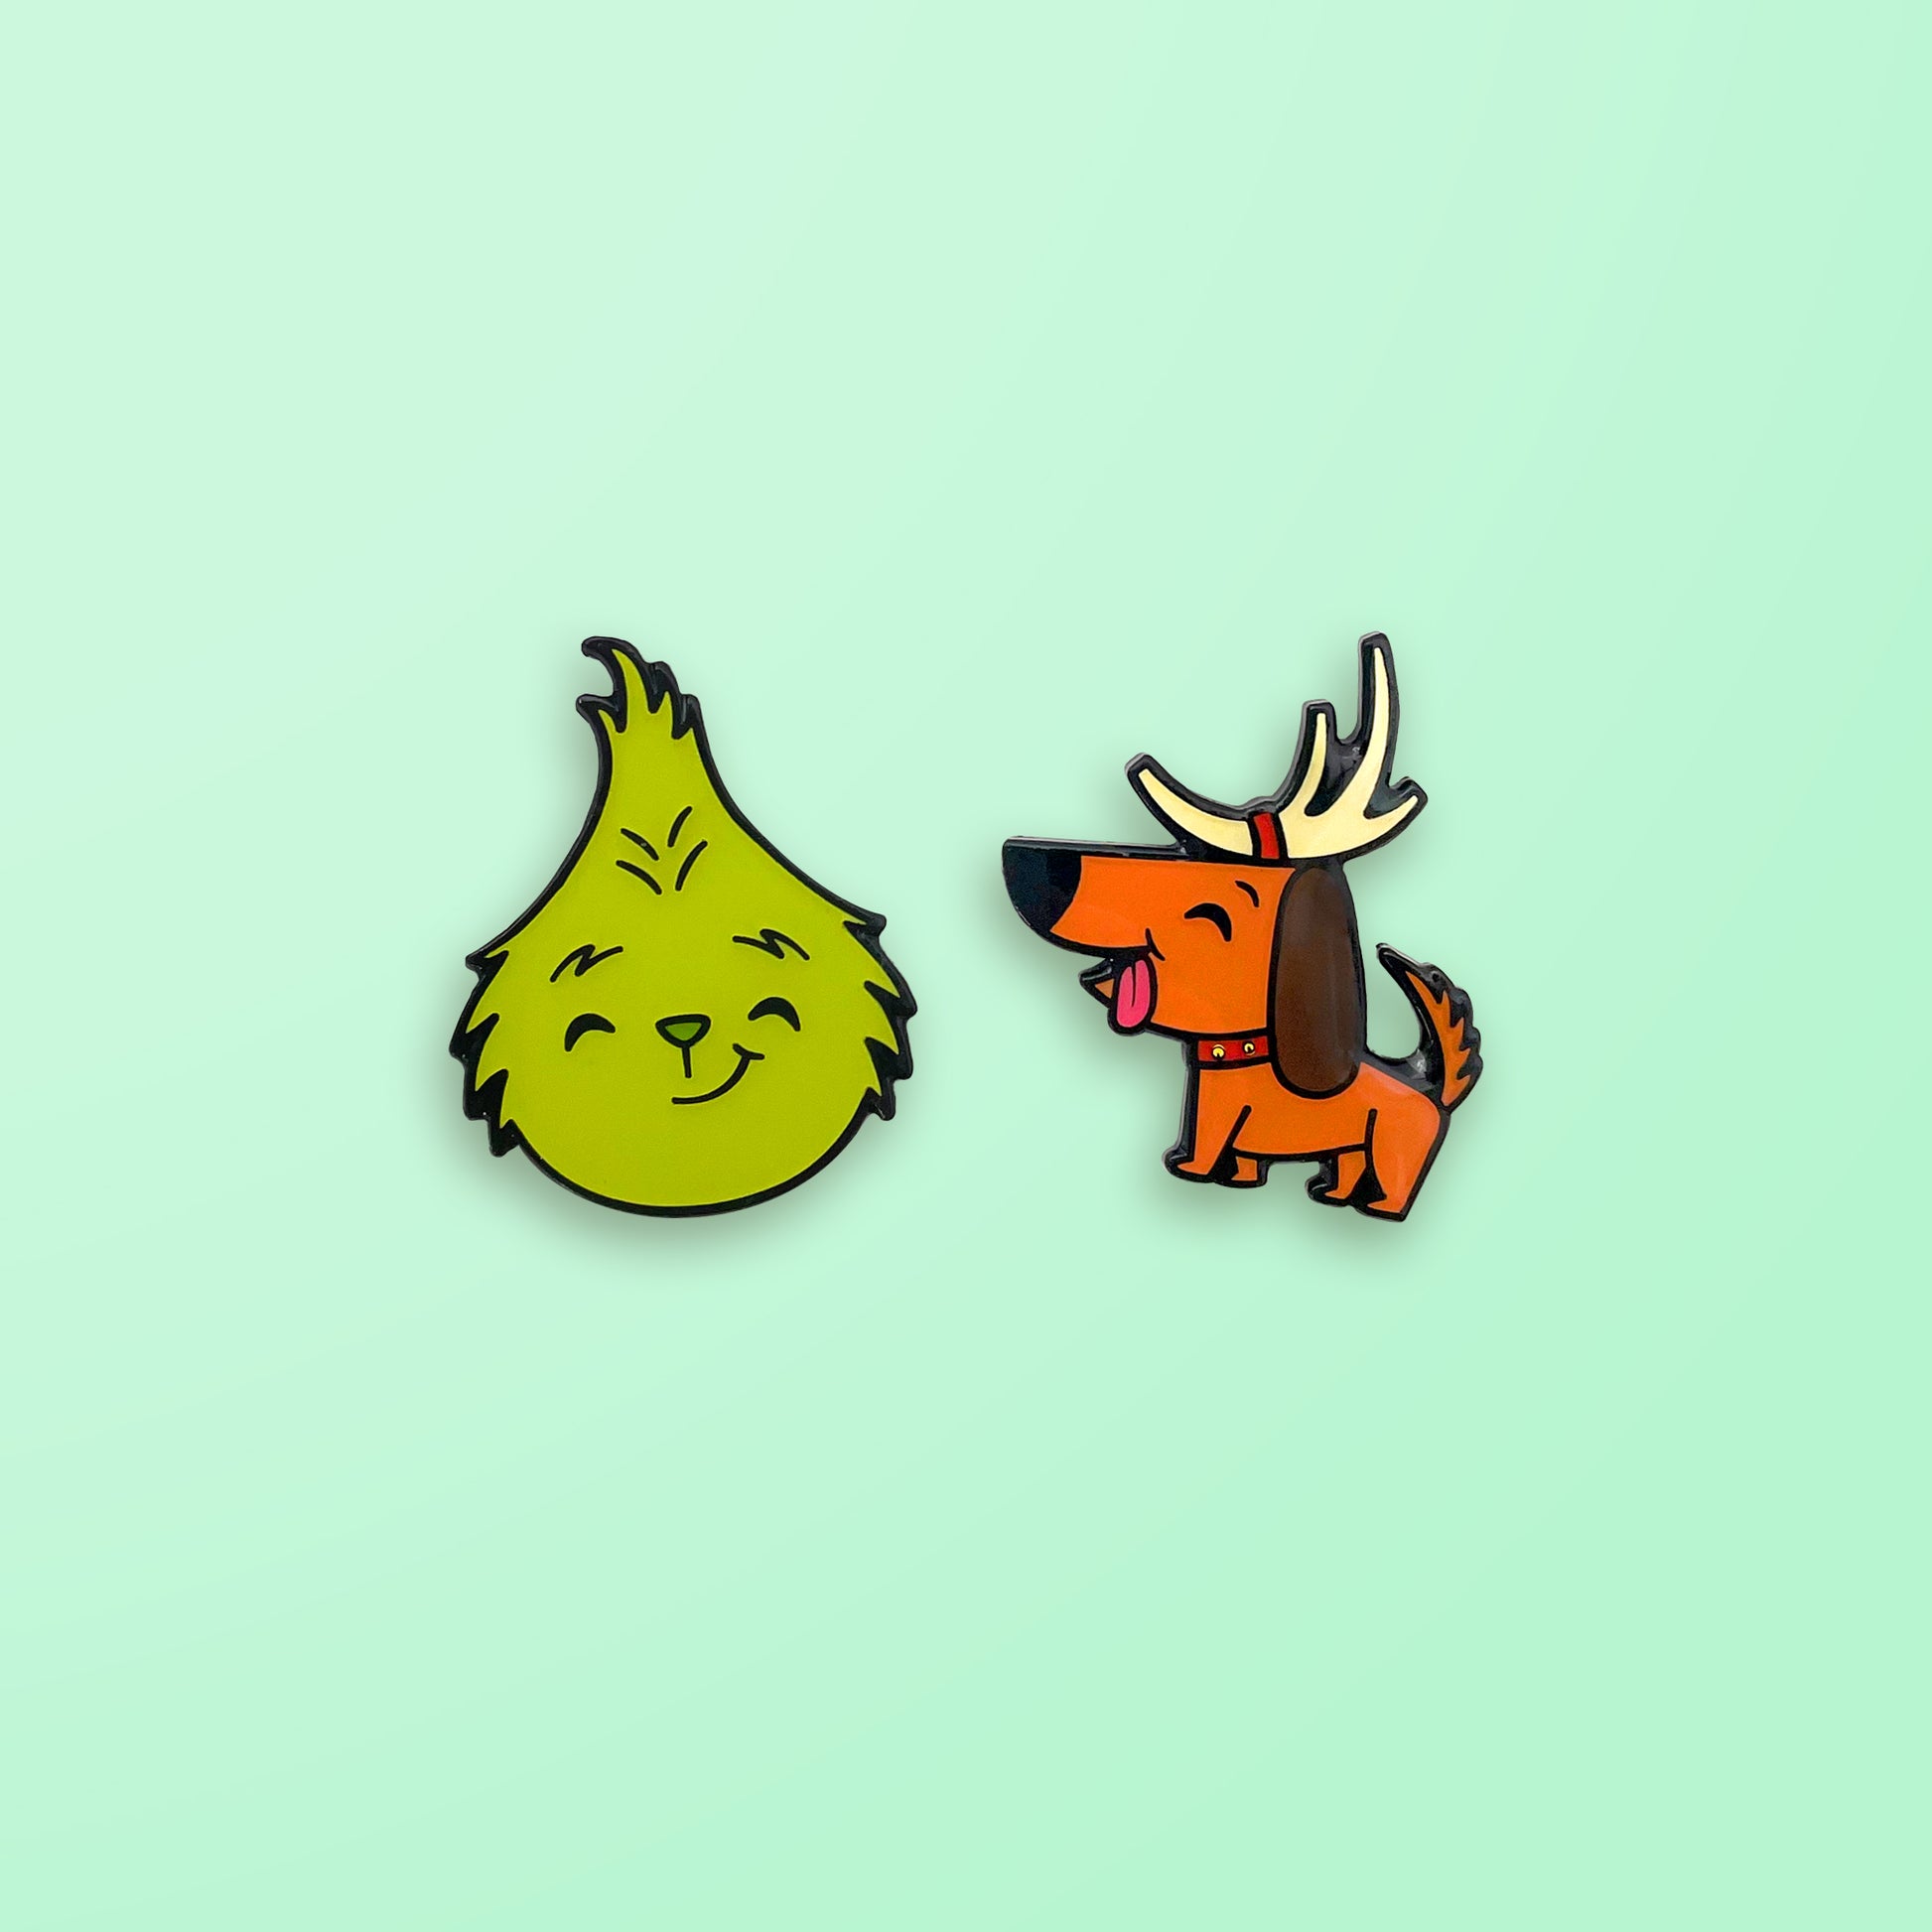 The Grinch and Max enamel pin set on mint green background